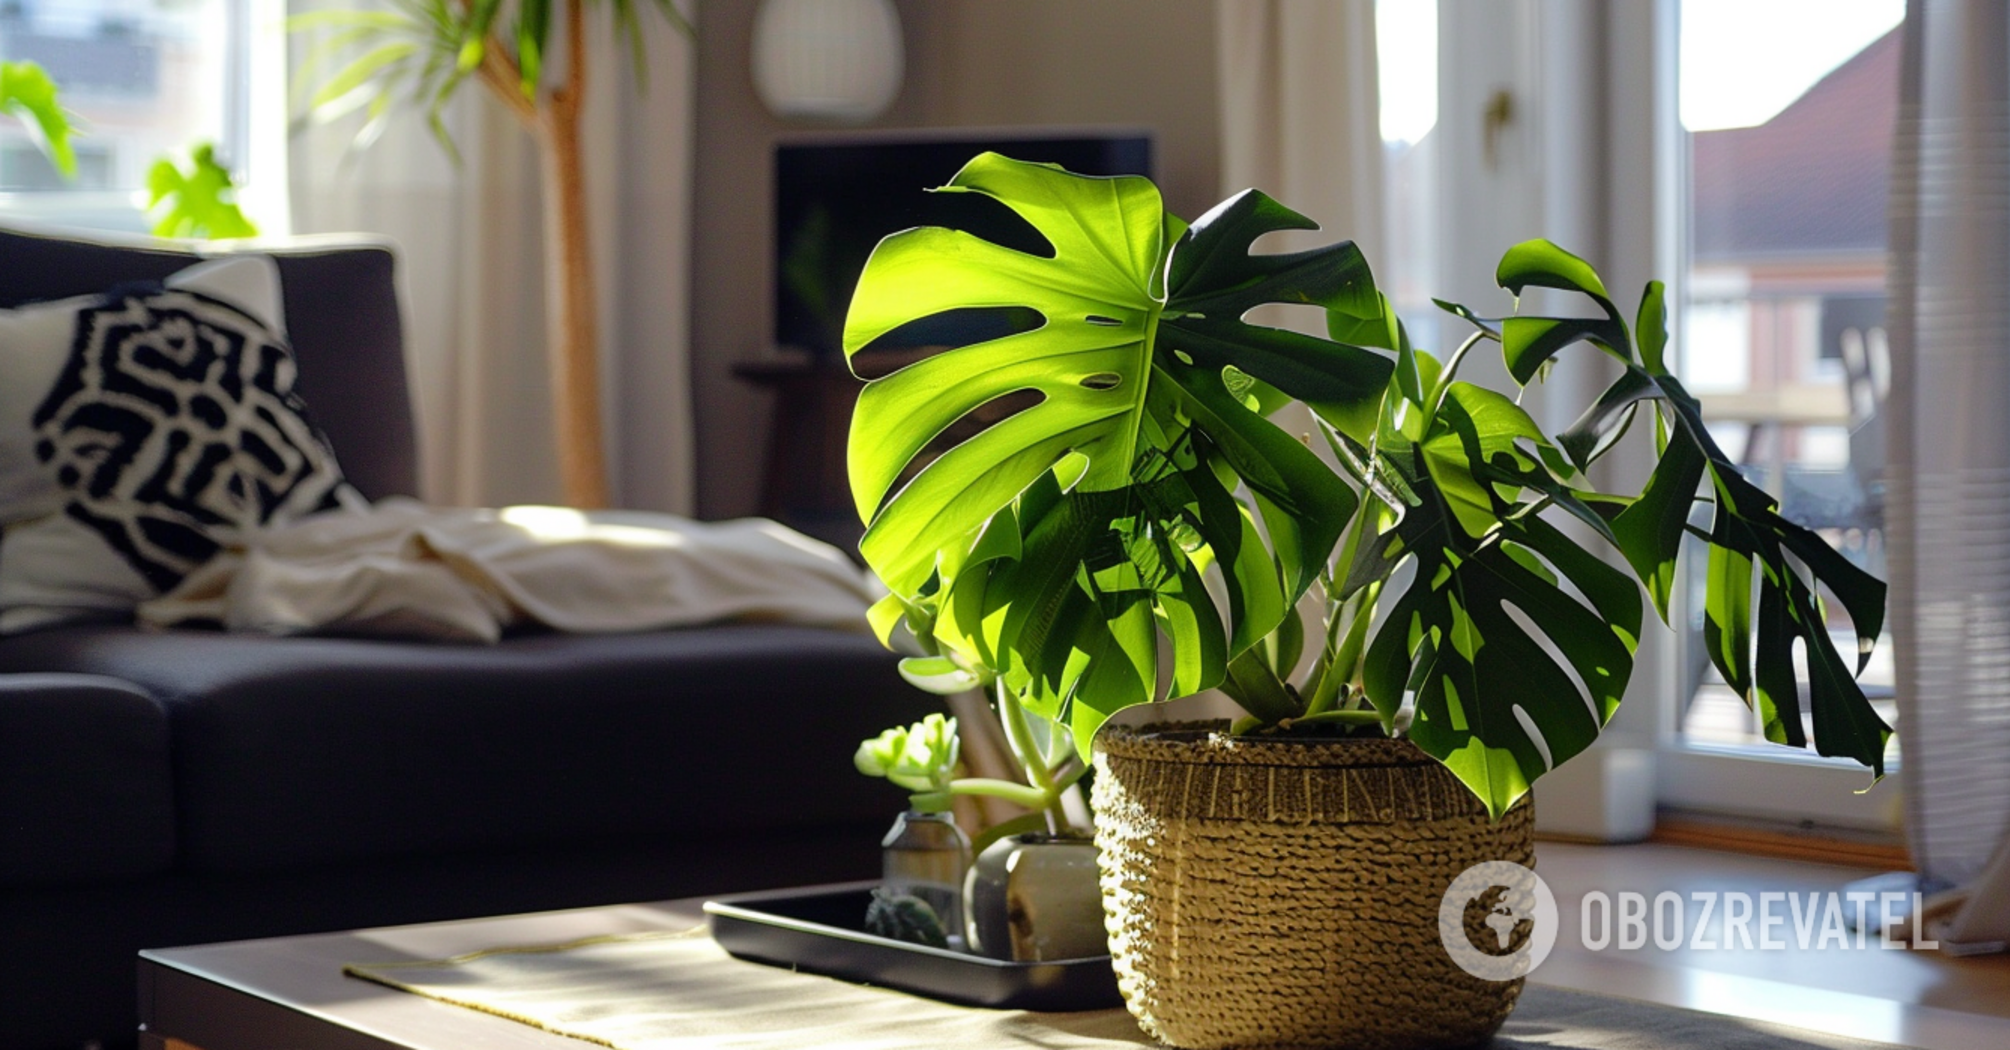 How to accelerate the growth of indoor plants: a little-known trick